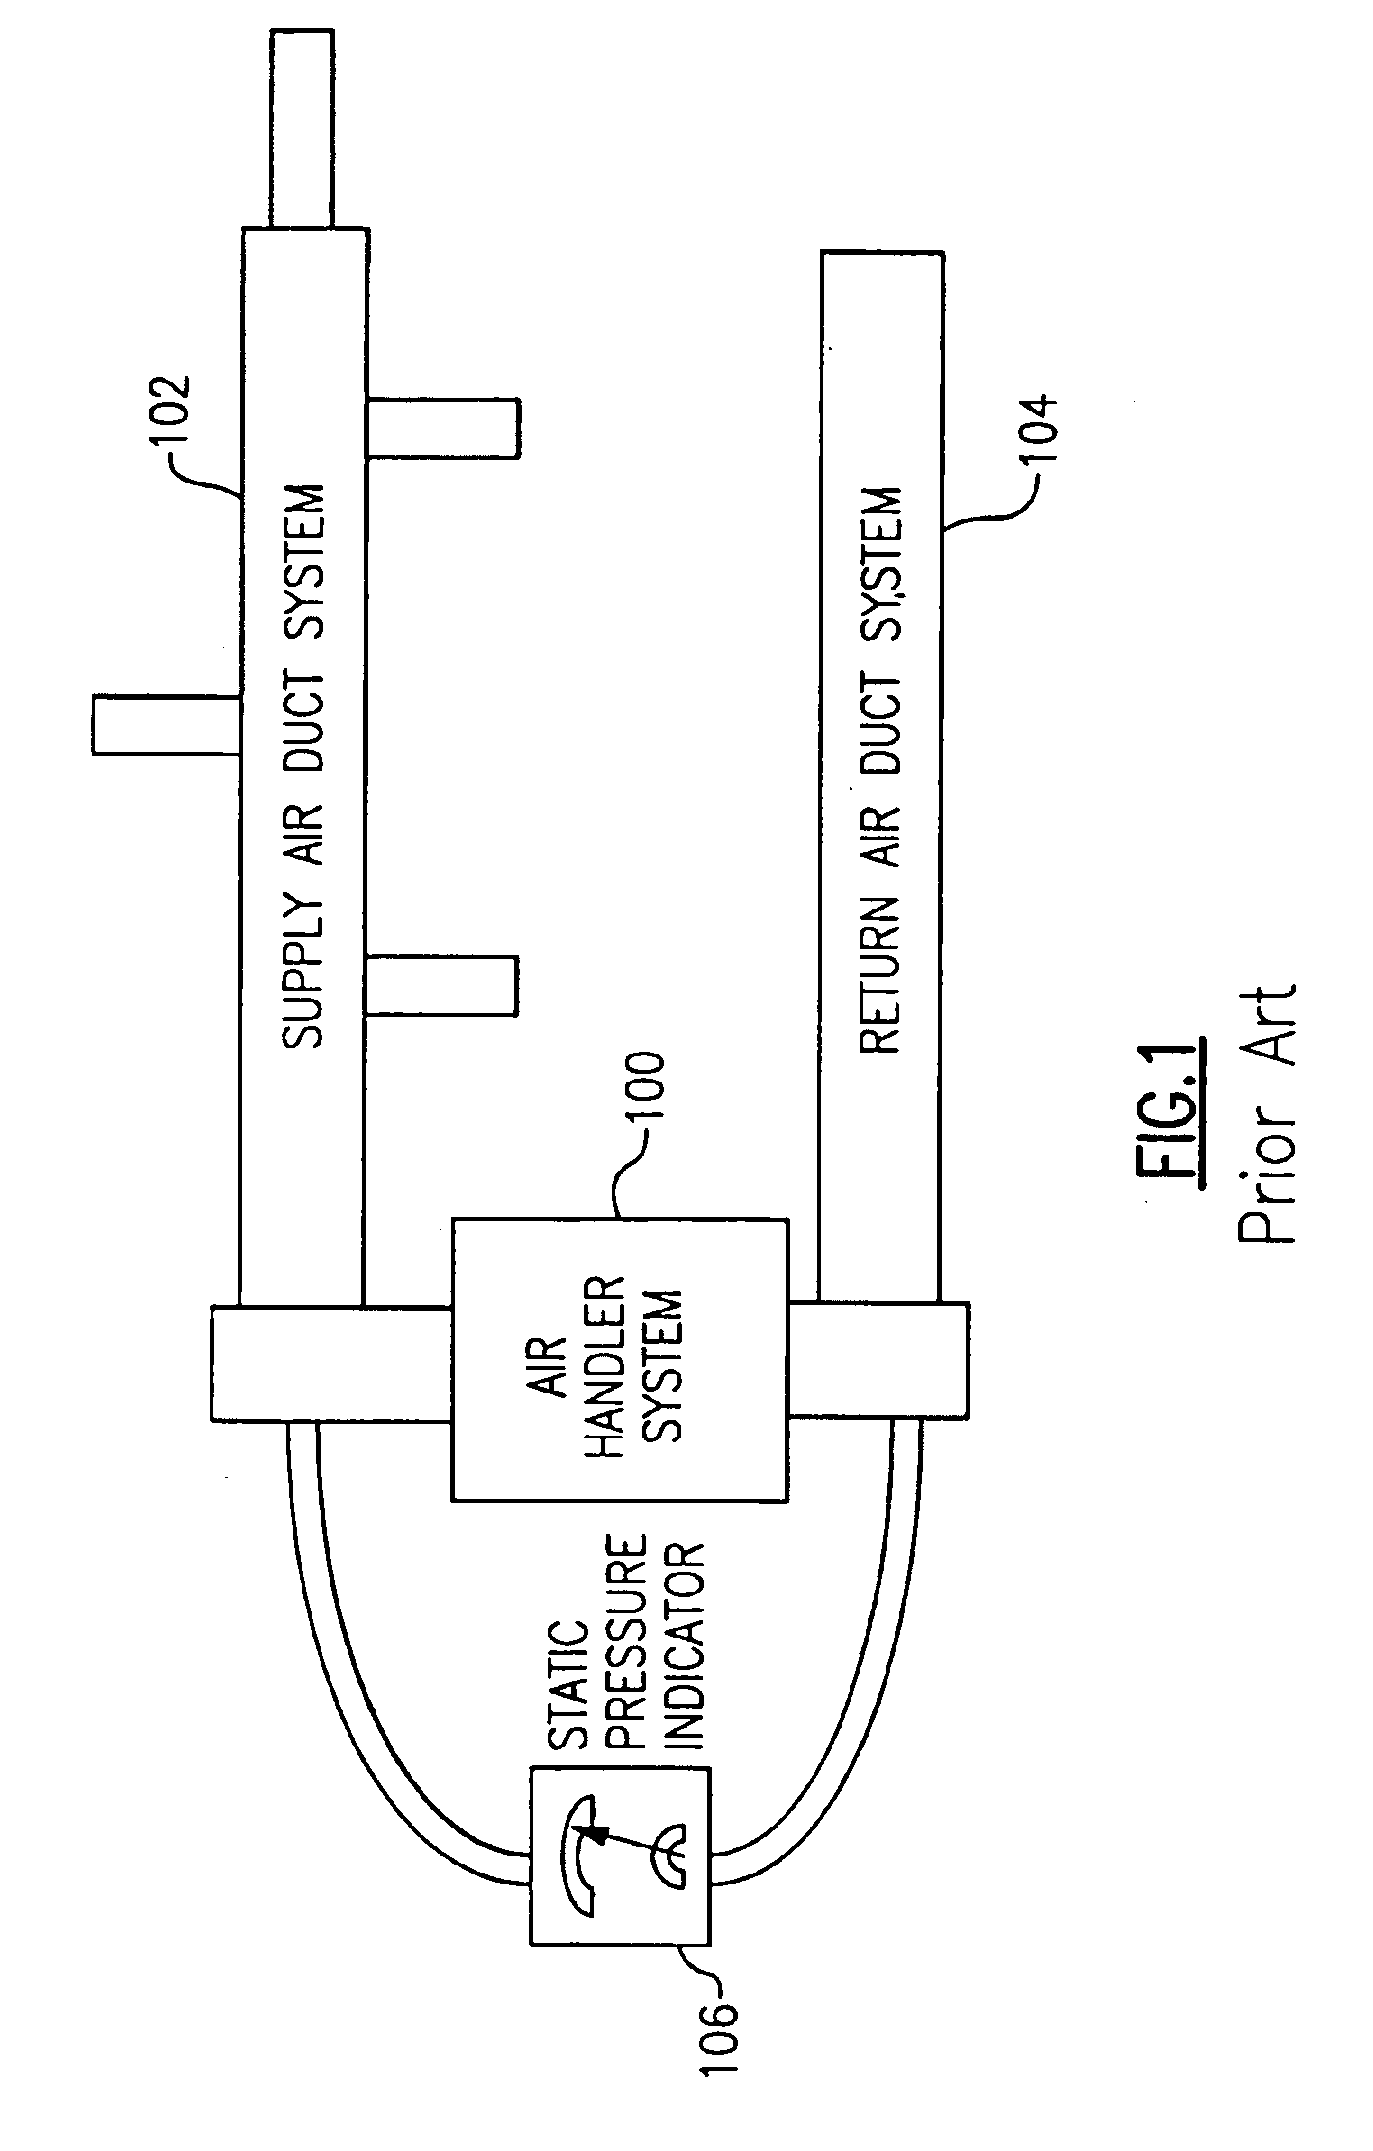 Method of determining static pressure in a ducted air delivery system using a variable speed blower motor